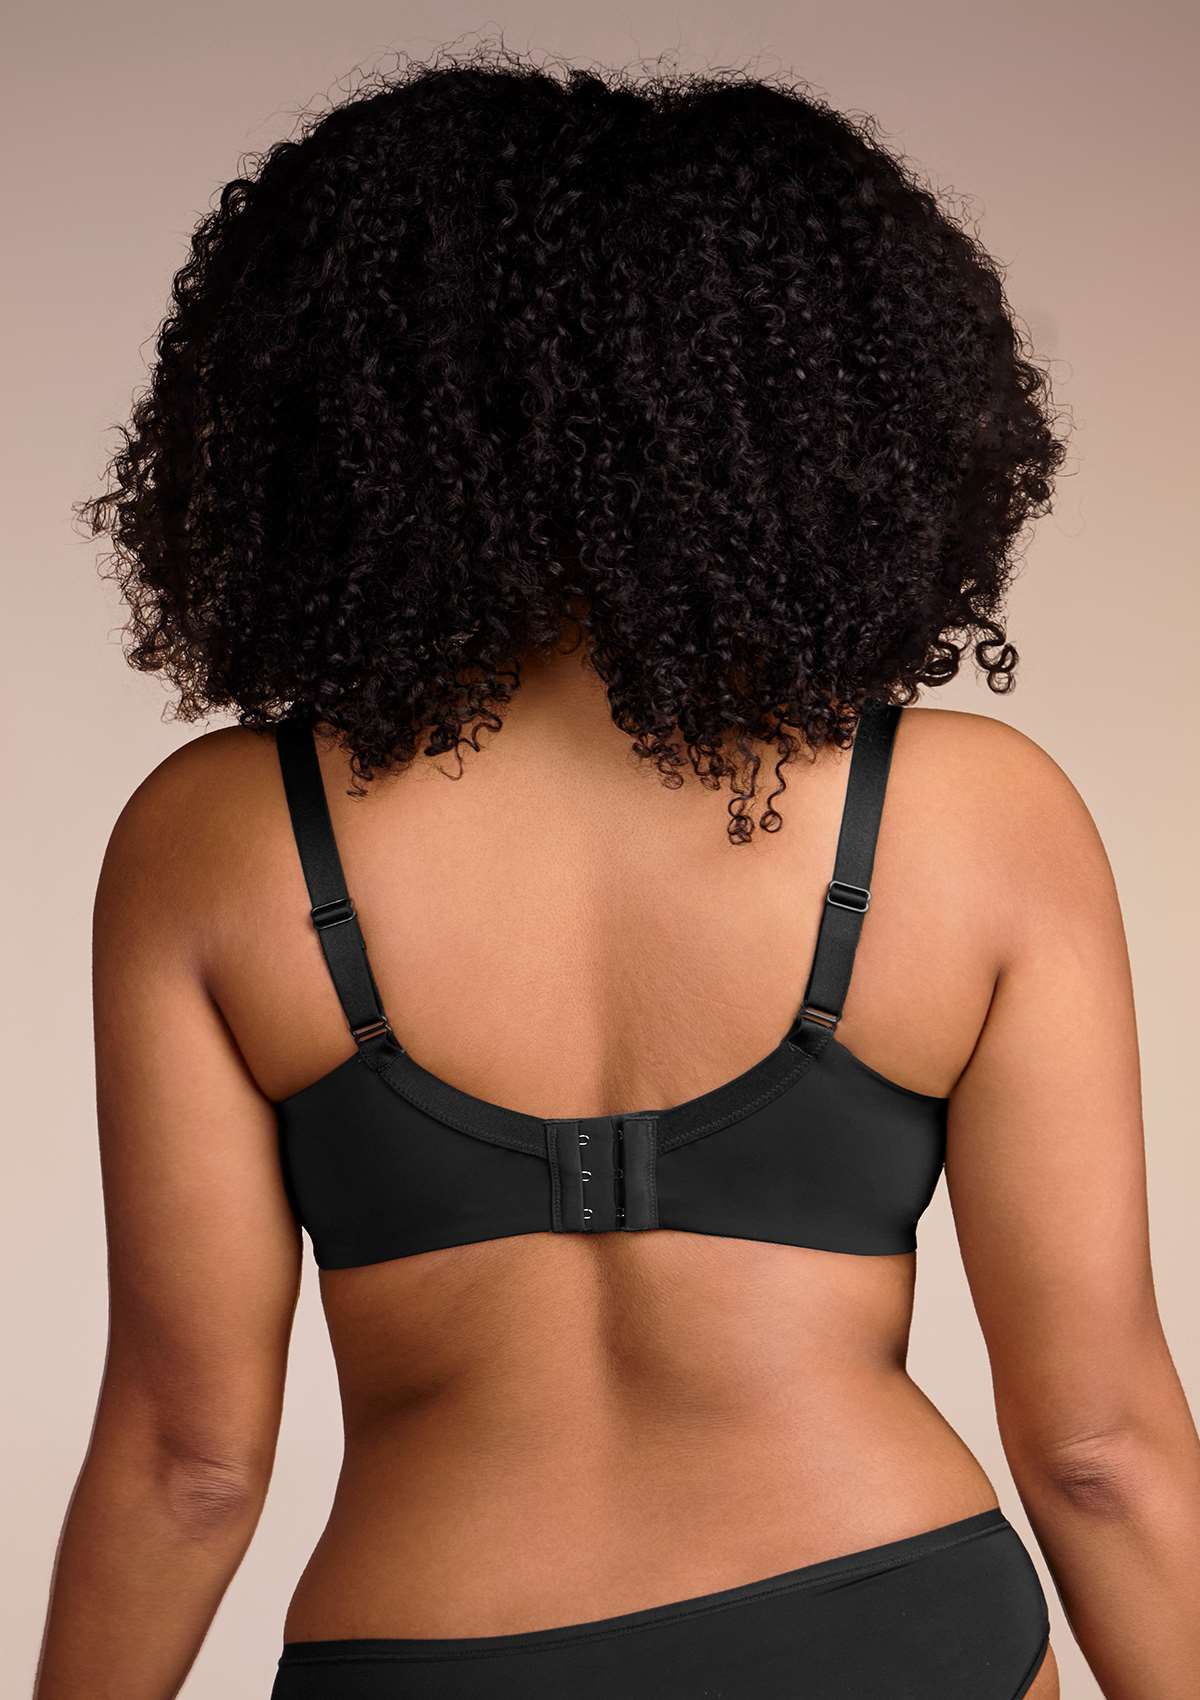 HSIA Gemma Smooth Padded T-shirt Everyday Bras - For Lift And Comfort - Black / 42 / C